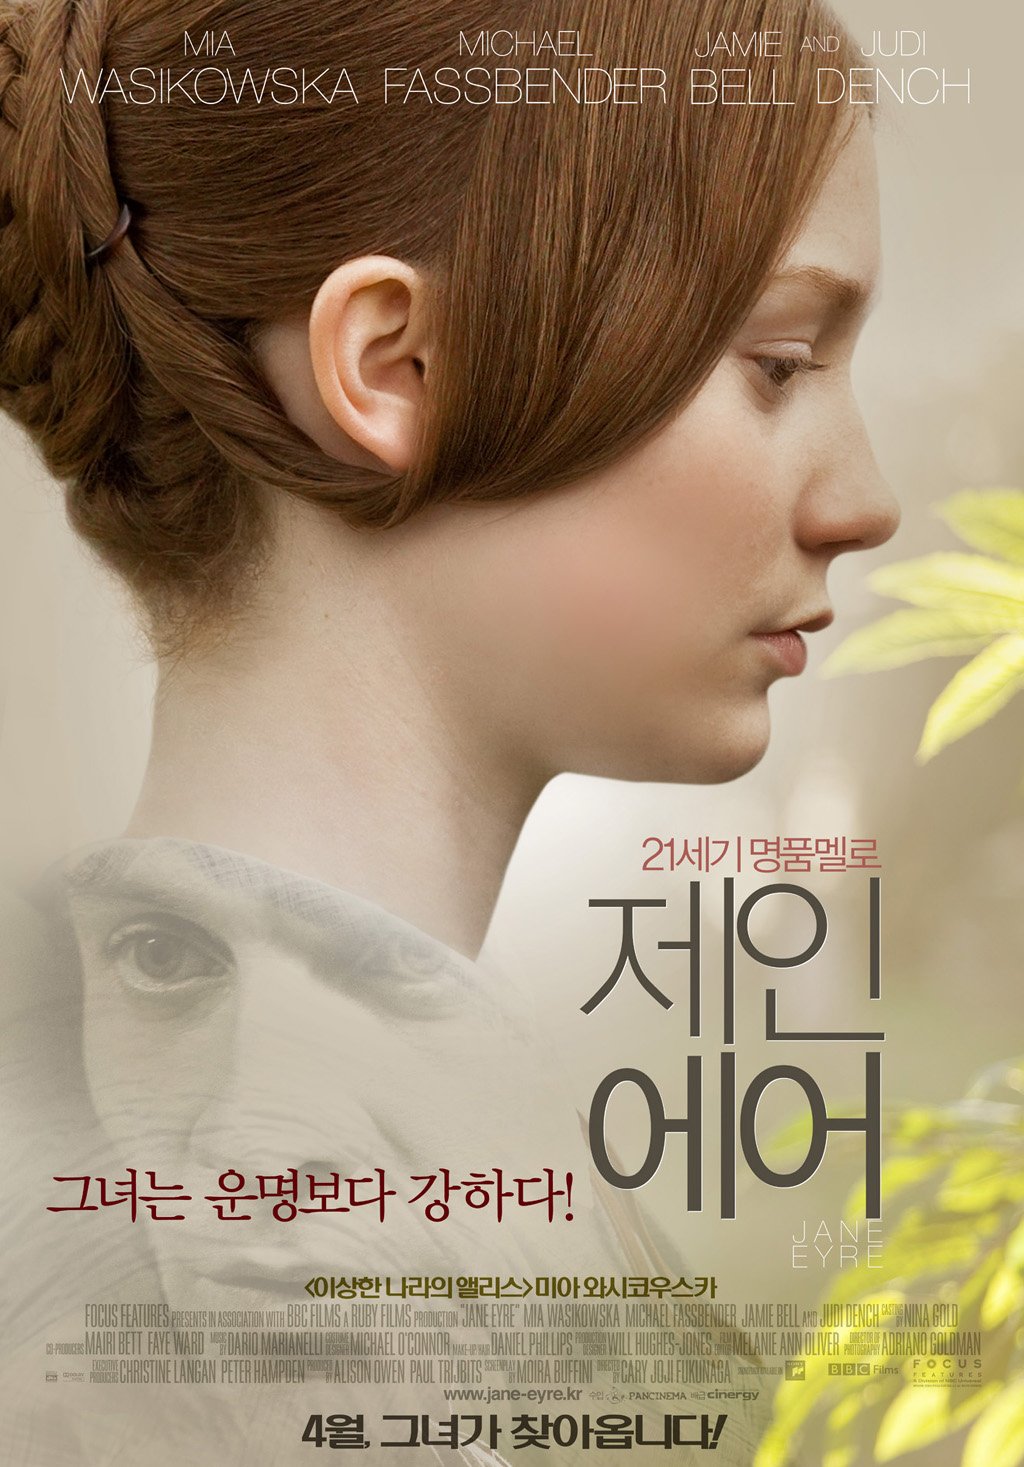 Extra Large Movie Poster Image for Jane Eyre (#2 of 6)